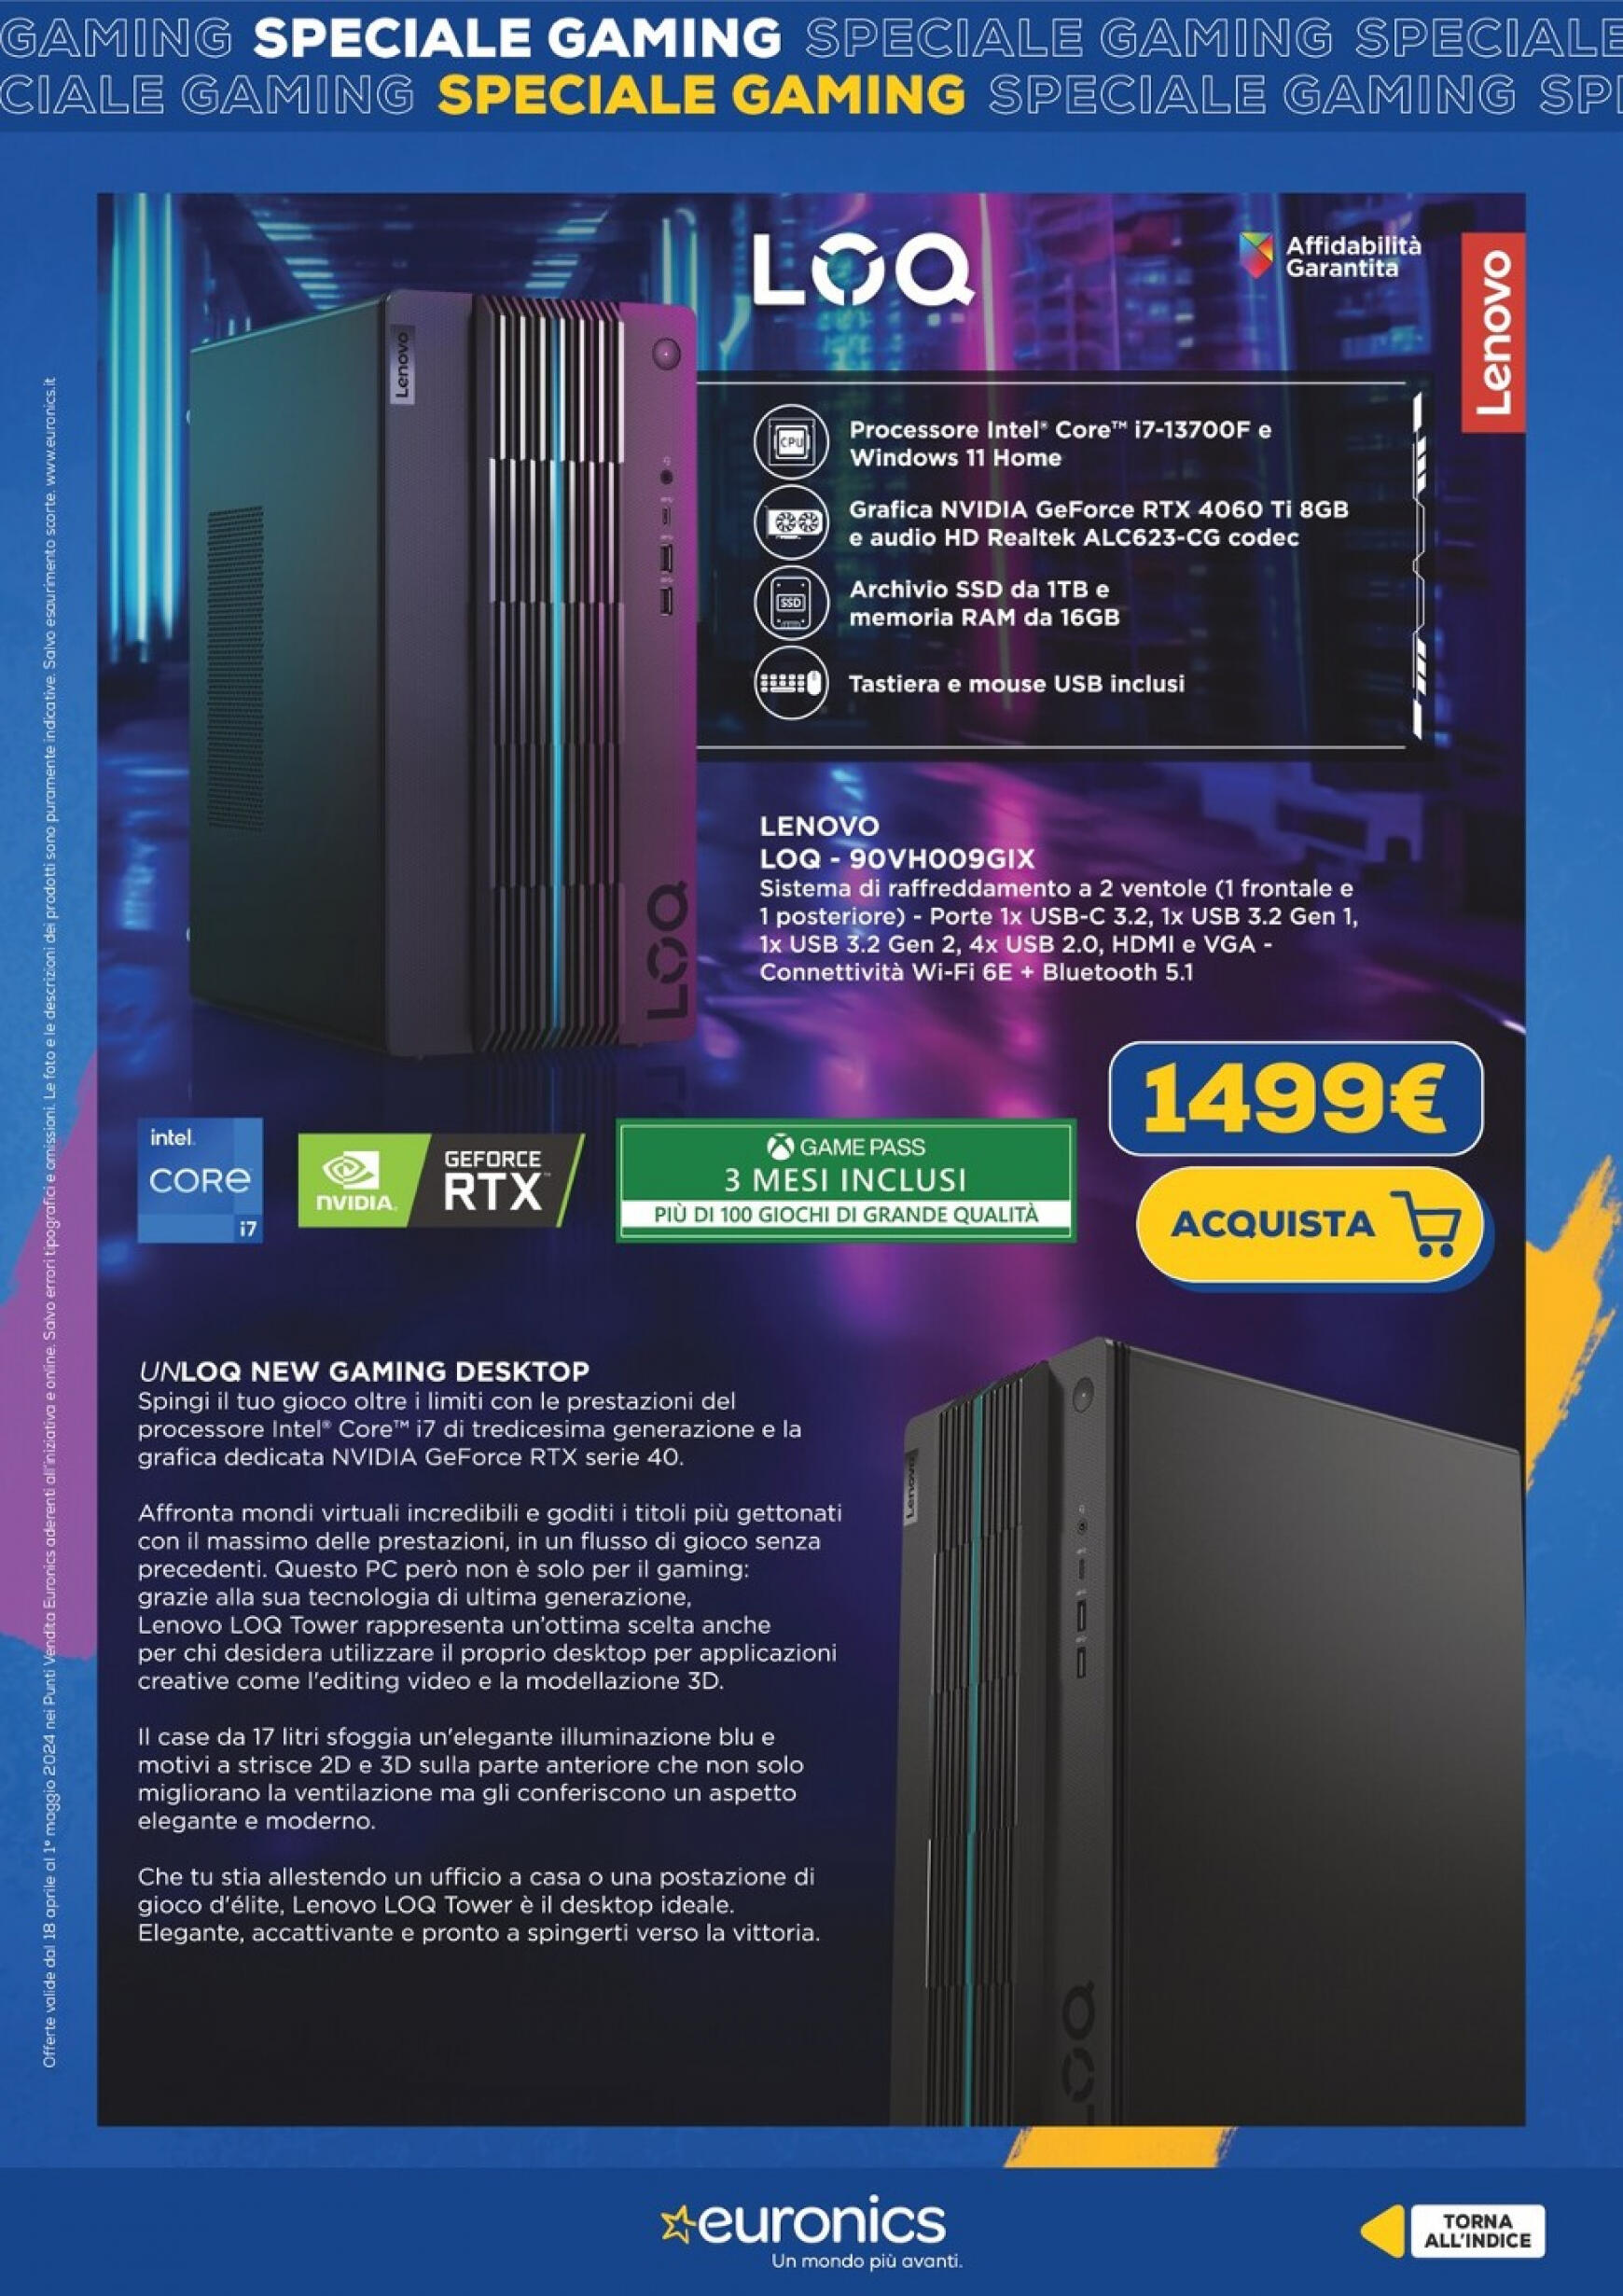 euronics - Nuovo volantino Euronics - Speciale Gaming 18.04. - 01.05. - page: 8